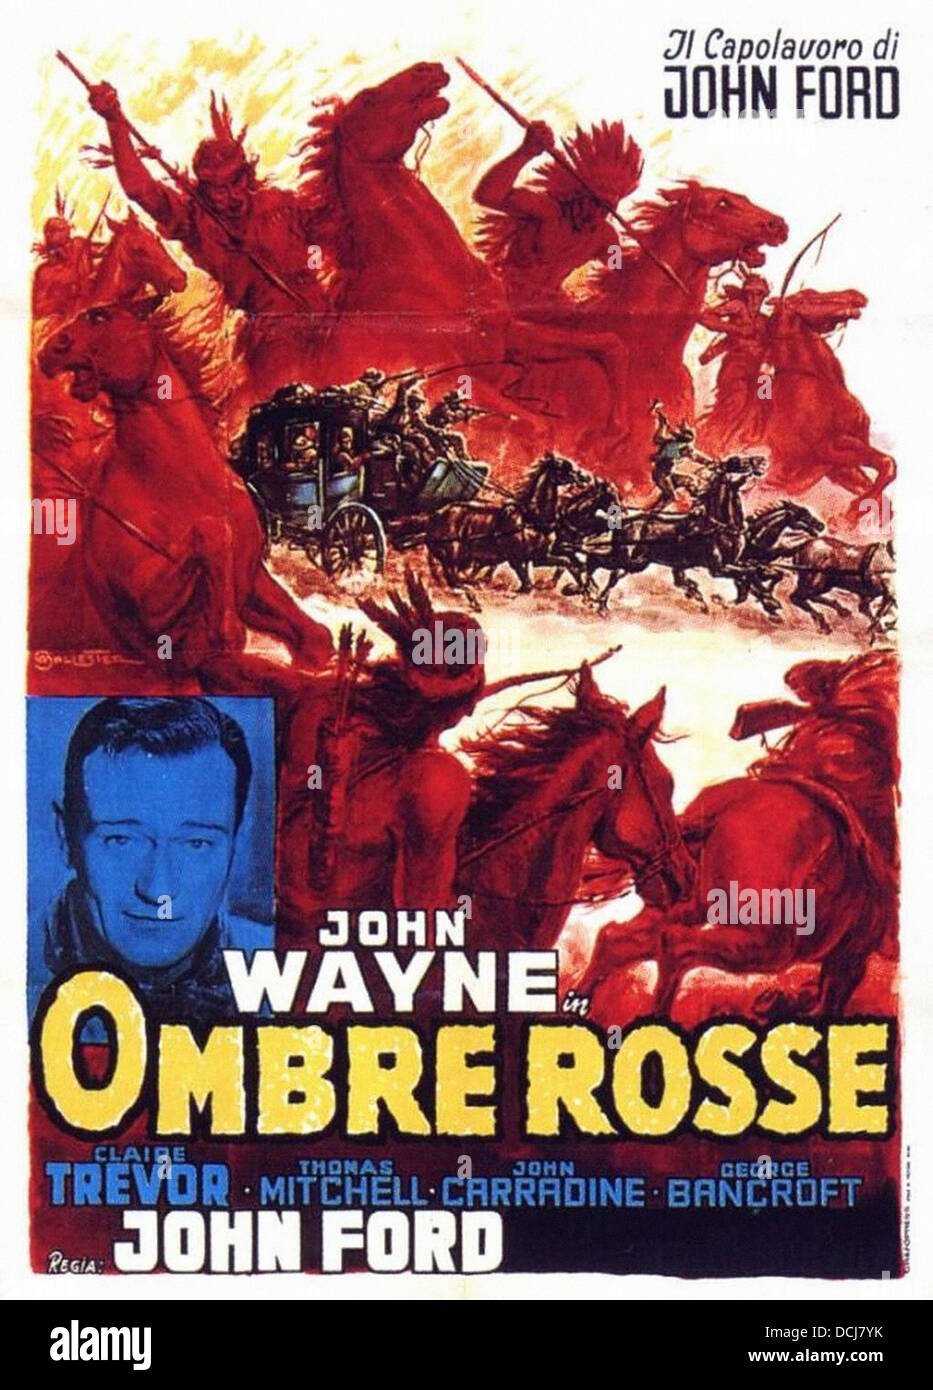 STAGECOACH - Italian movie poster - Directed by John Ford - United Artists 1939 Stock Photo